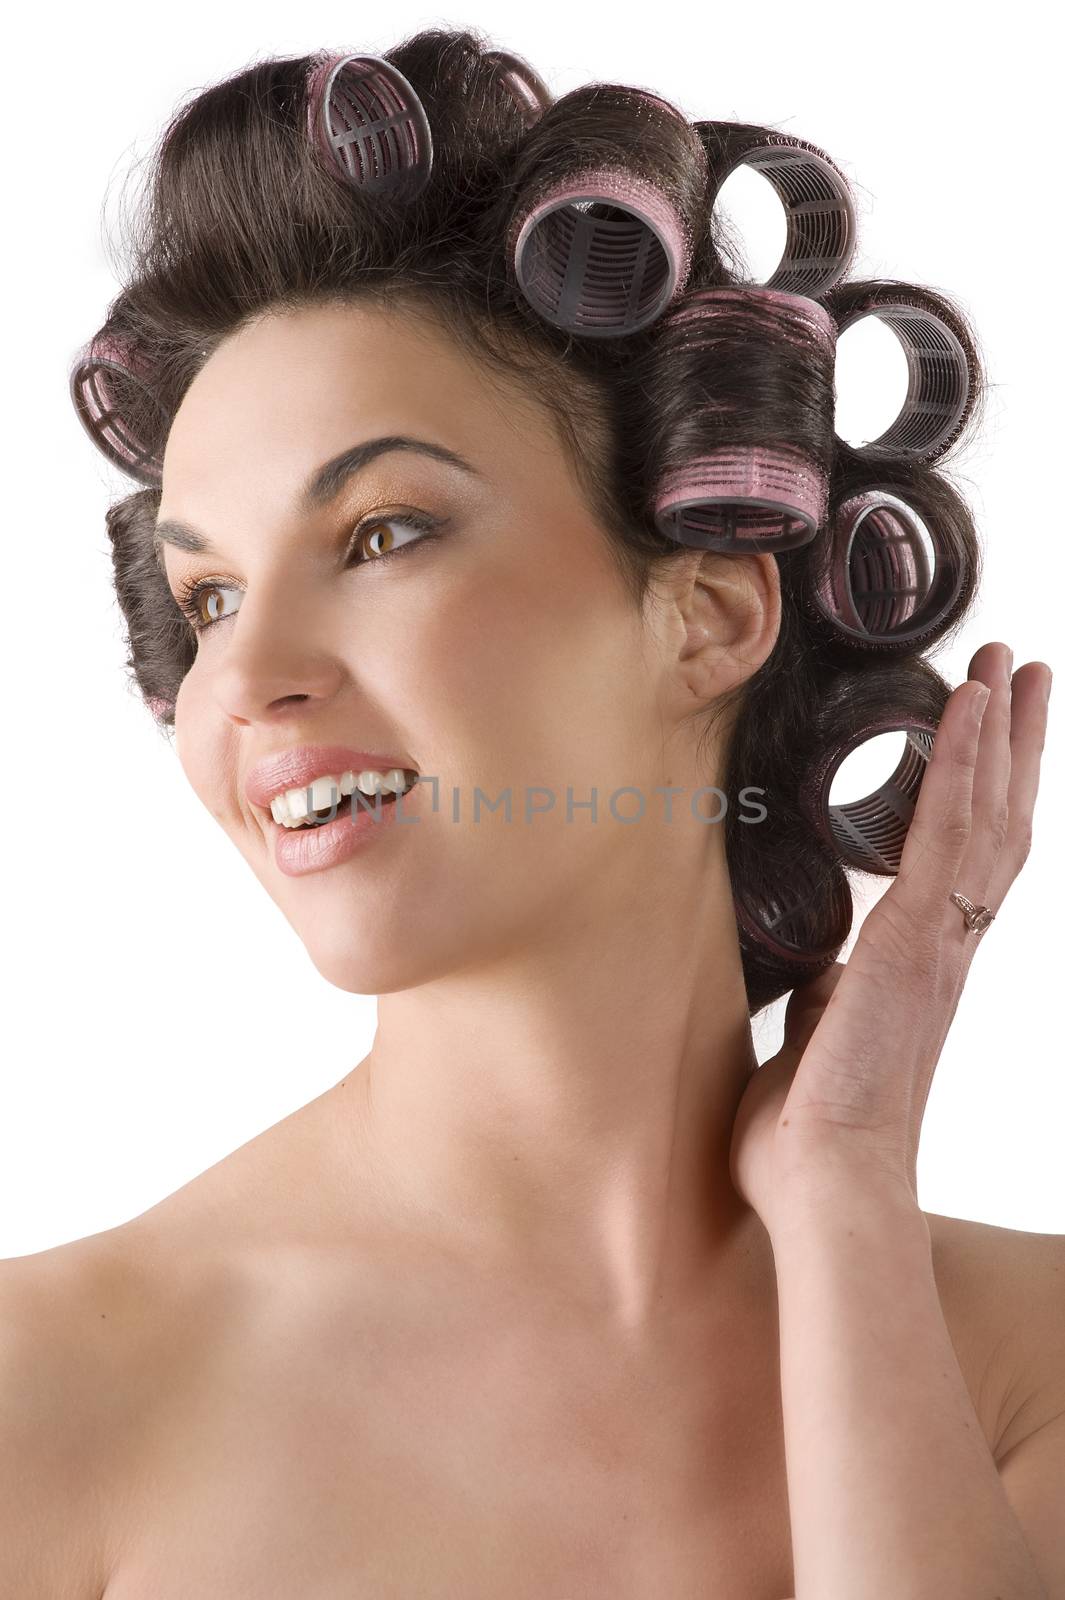 woman smiling with hair rollers by fotoCD